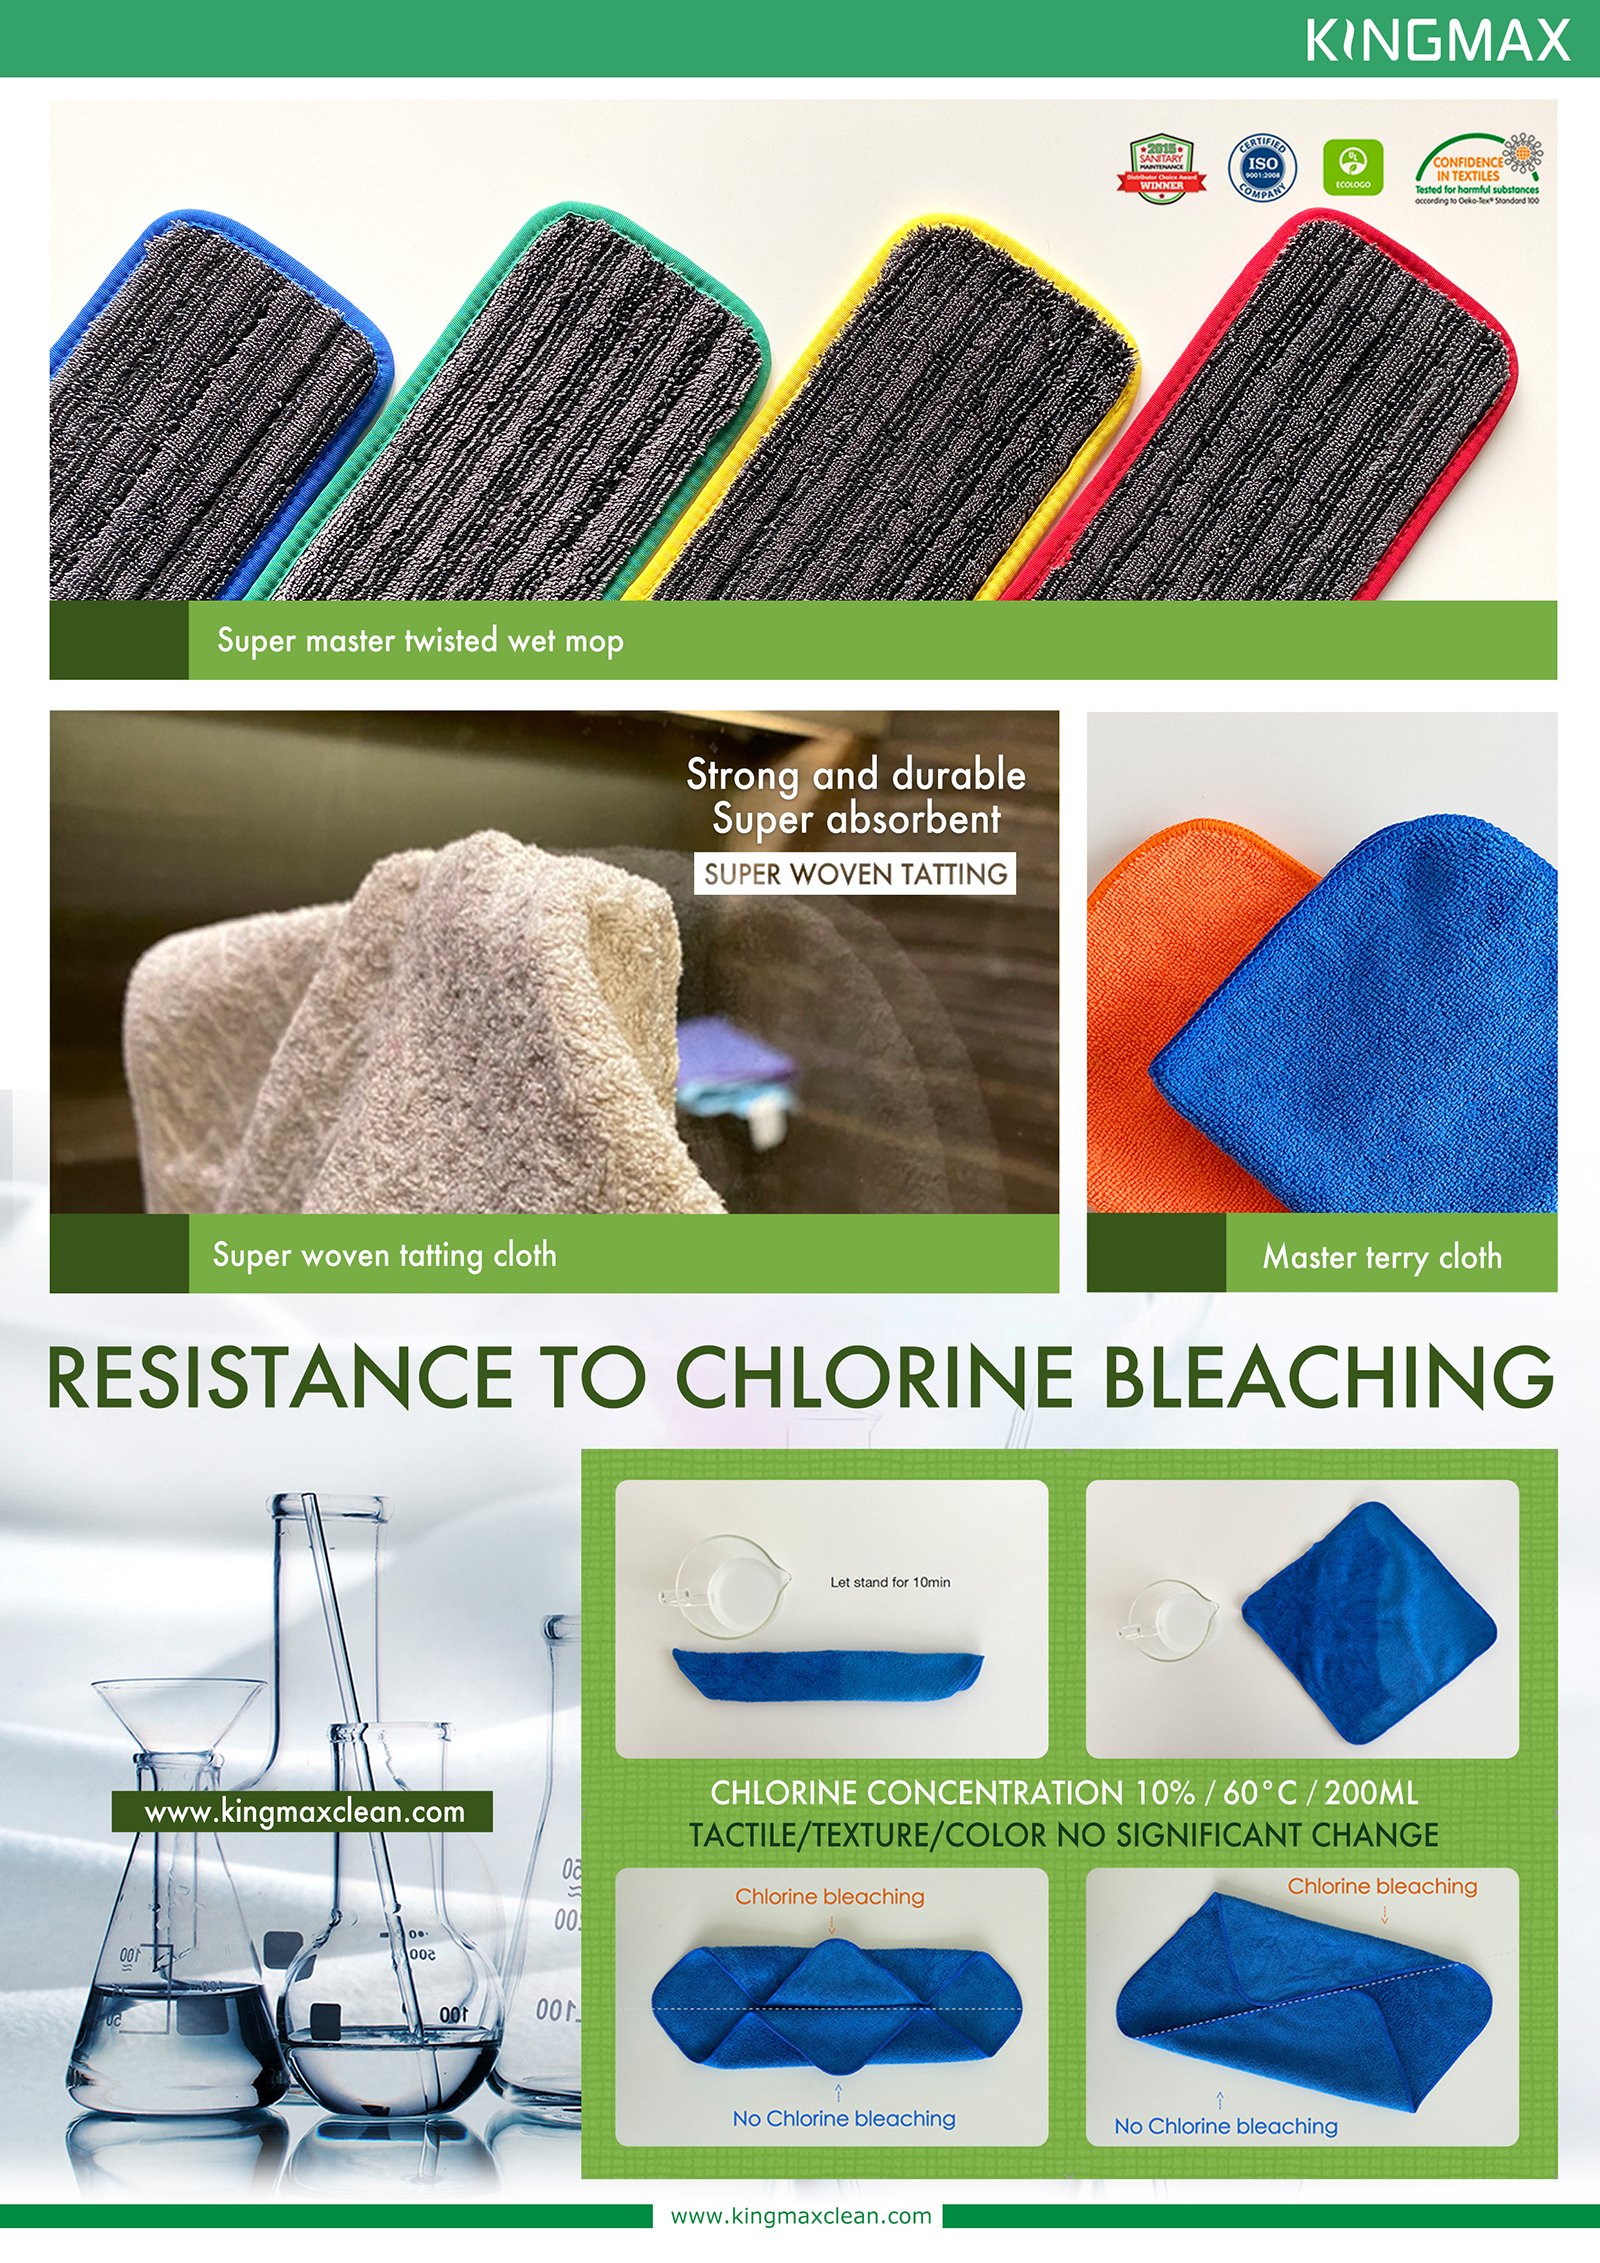 KINGMAX bleach Proof towels and bleachable mops are known for their high color fastness, bleach resistance to acidic or caustic cleaners.